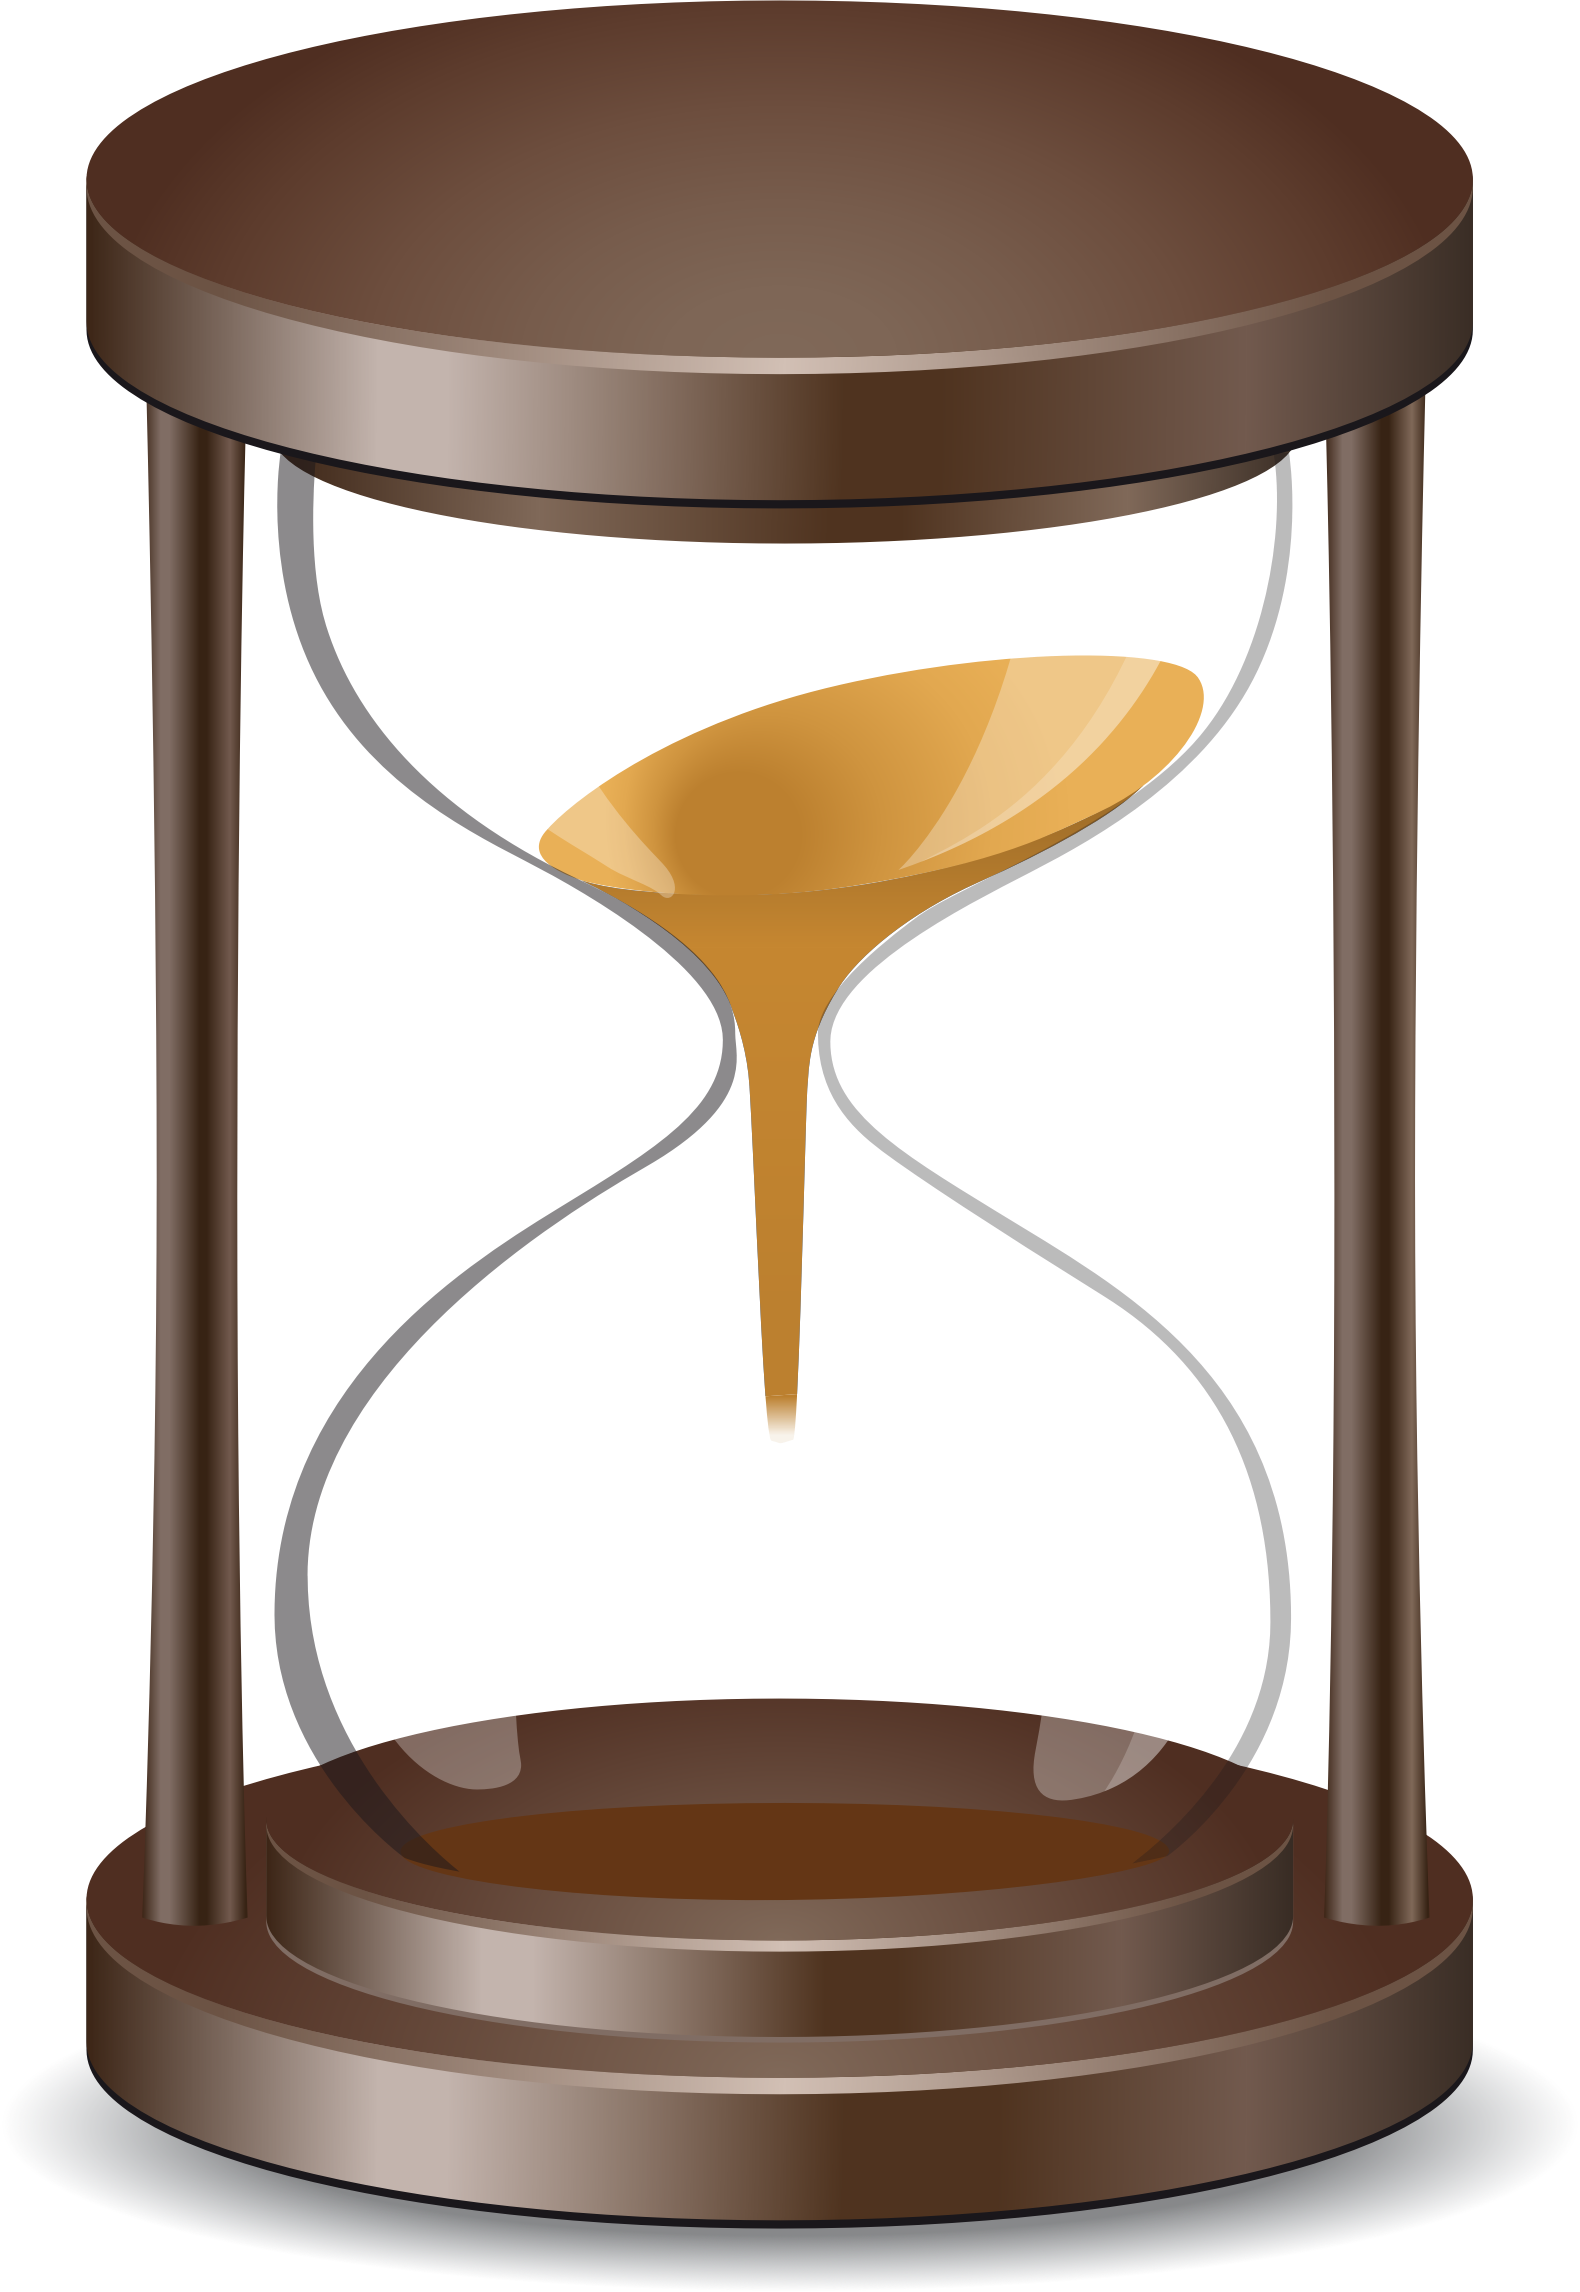  collection of transparent. Patience clipart hourglass